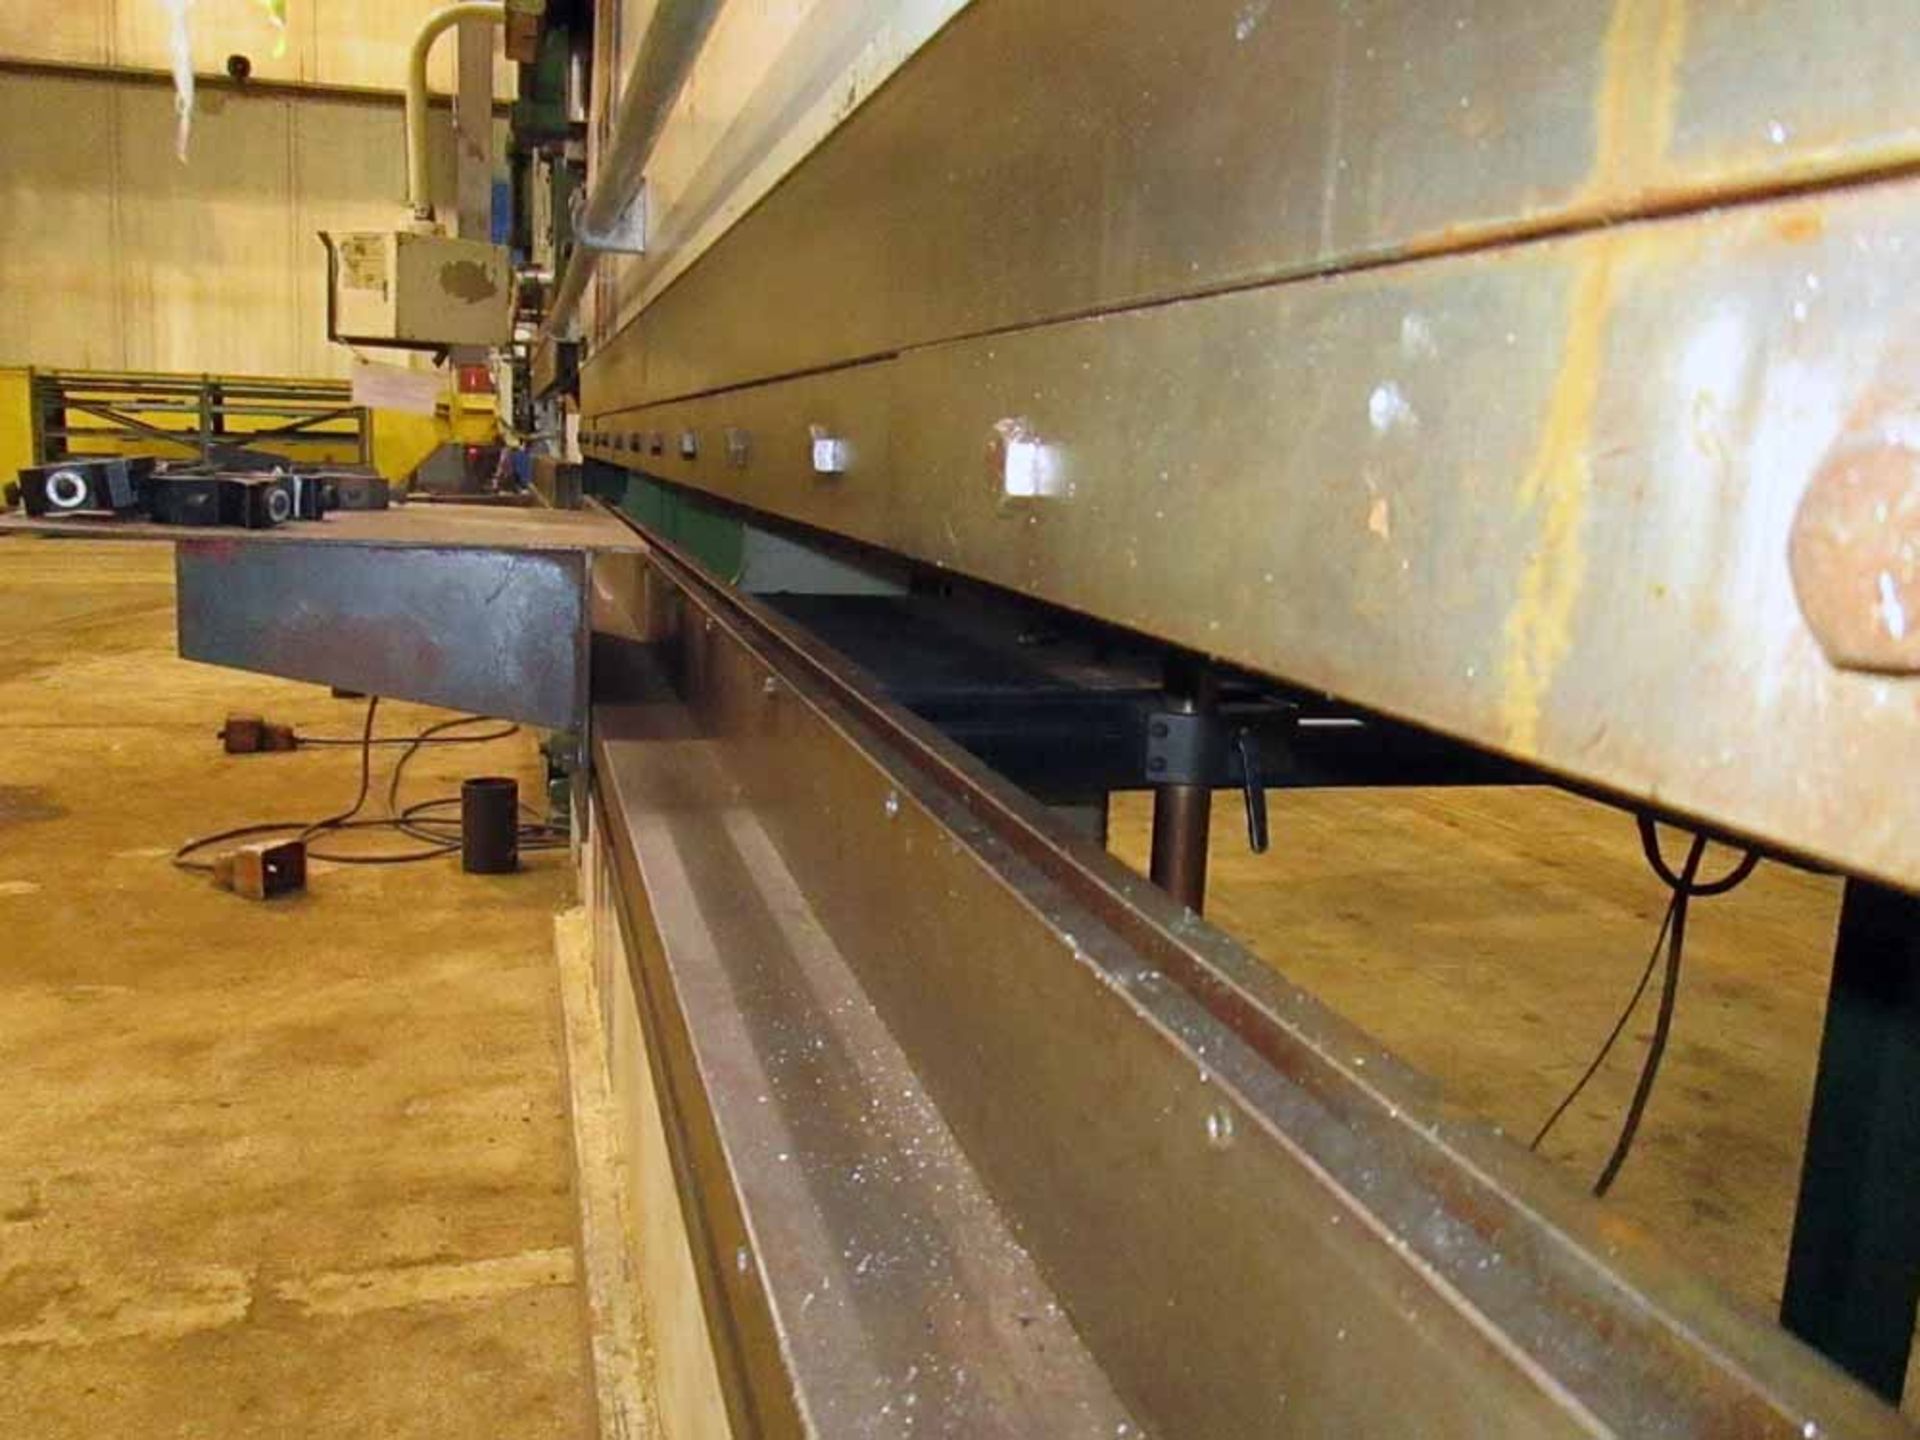 1986 Pacific CNC 2 Axis Hydraulic Press Brake, 110 Ton x 12', Mdl: J110-12, S/N: 9999 - Painesville, - Image 12 of 12